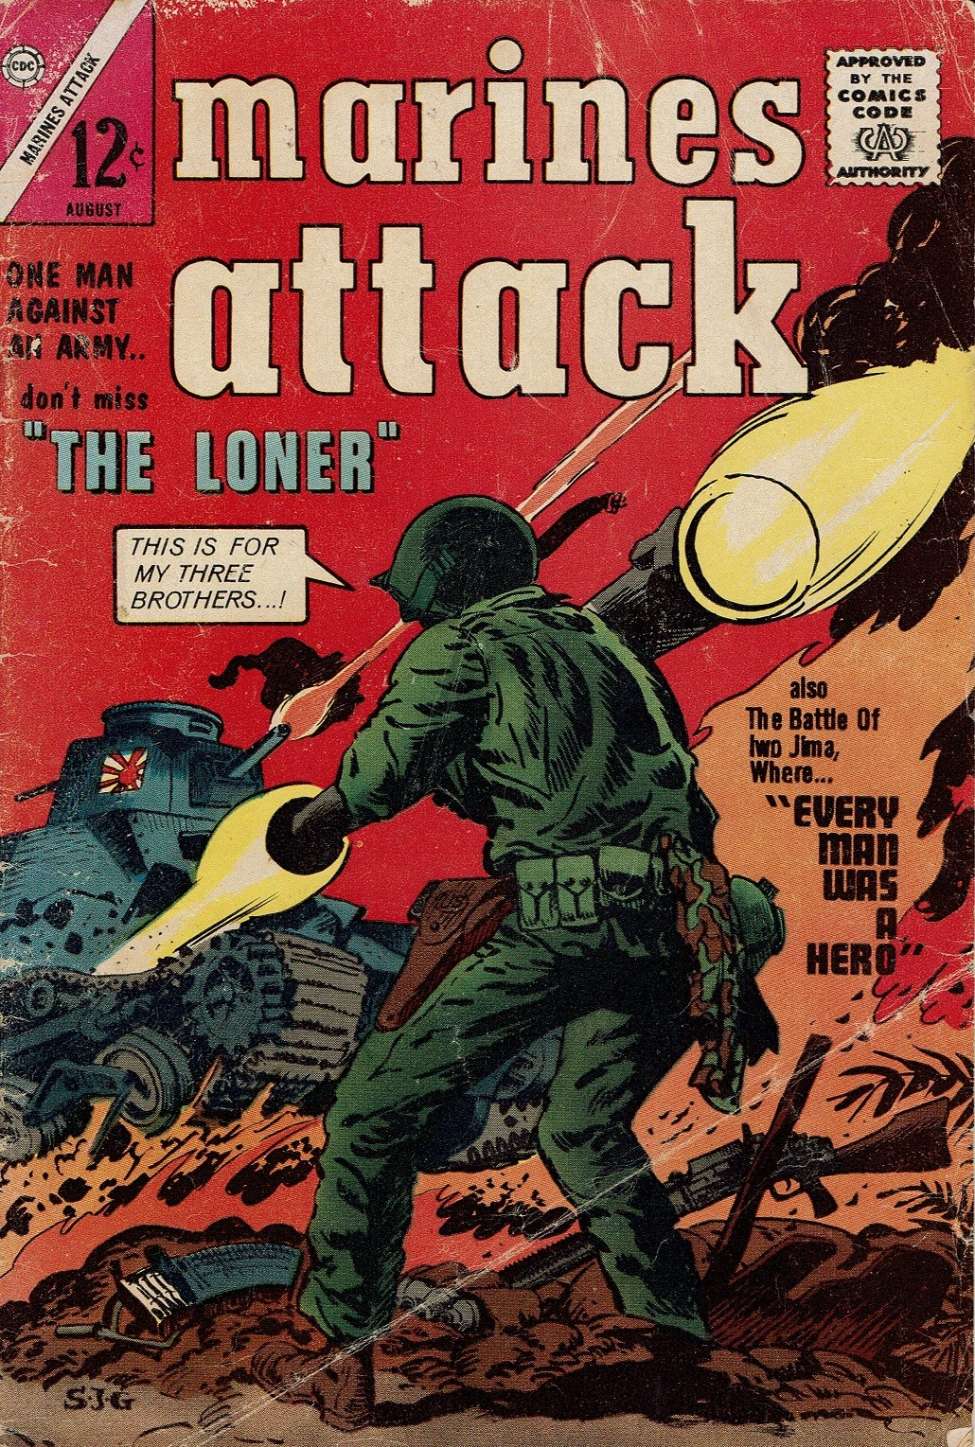 Book Cover For Marines Attack 1